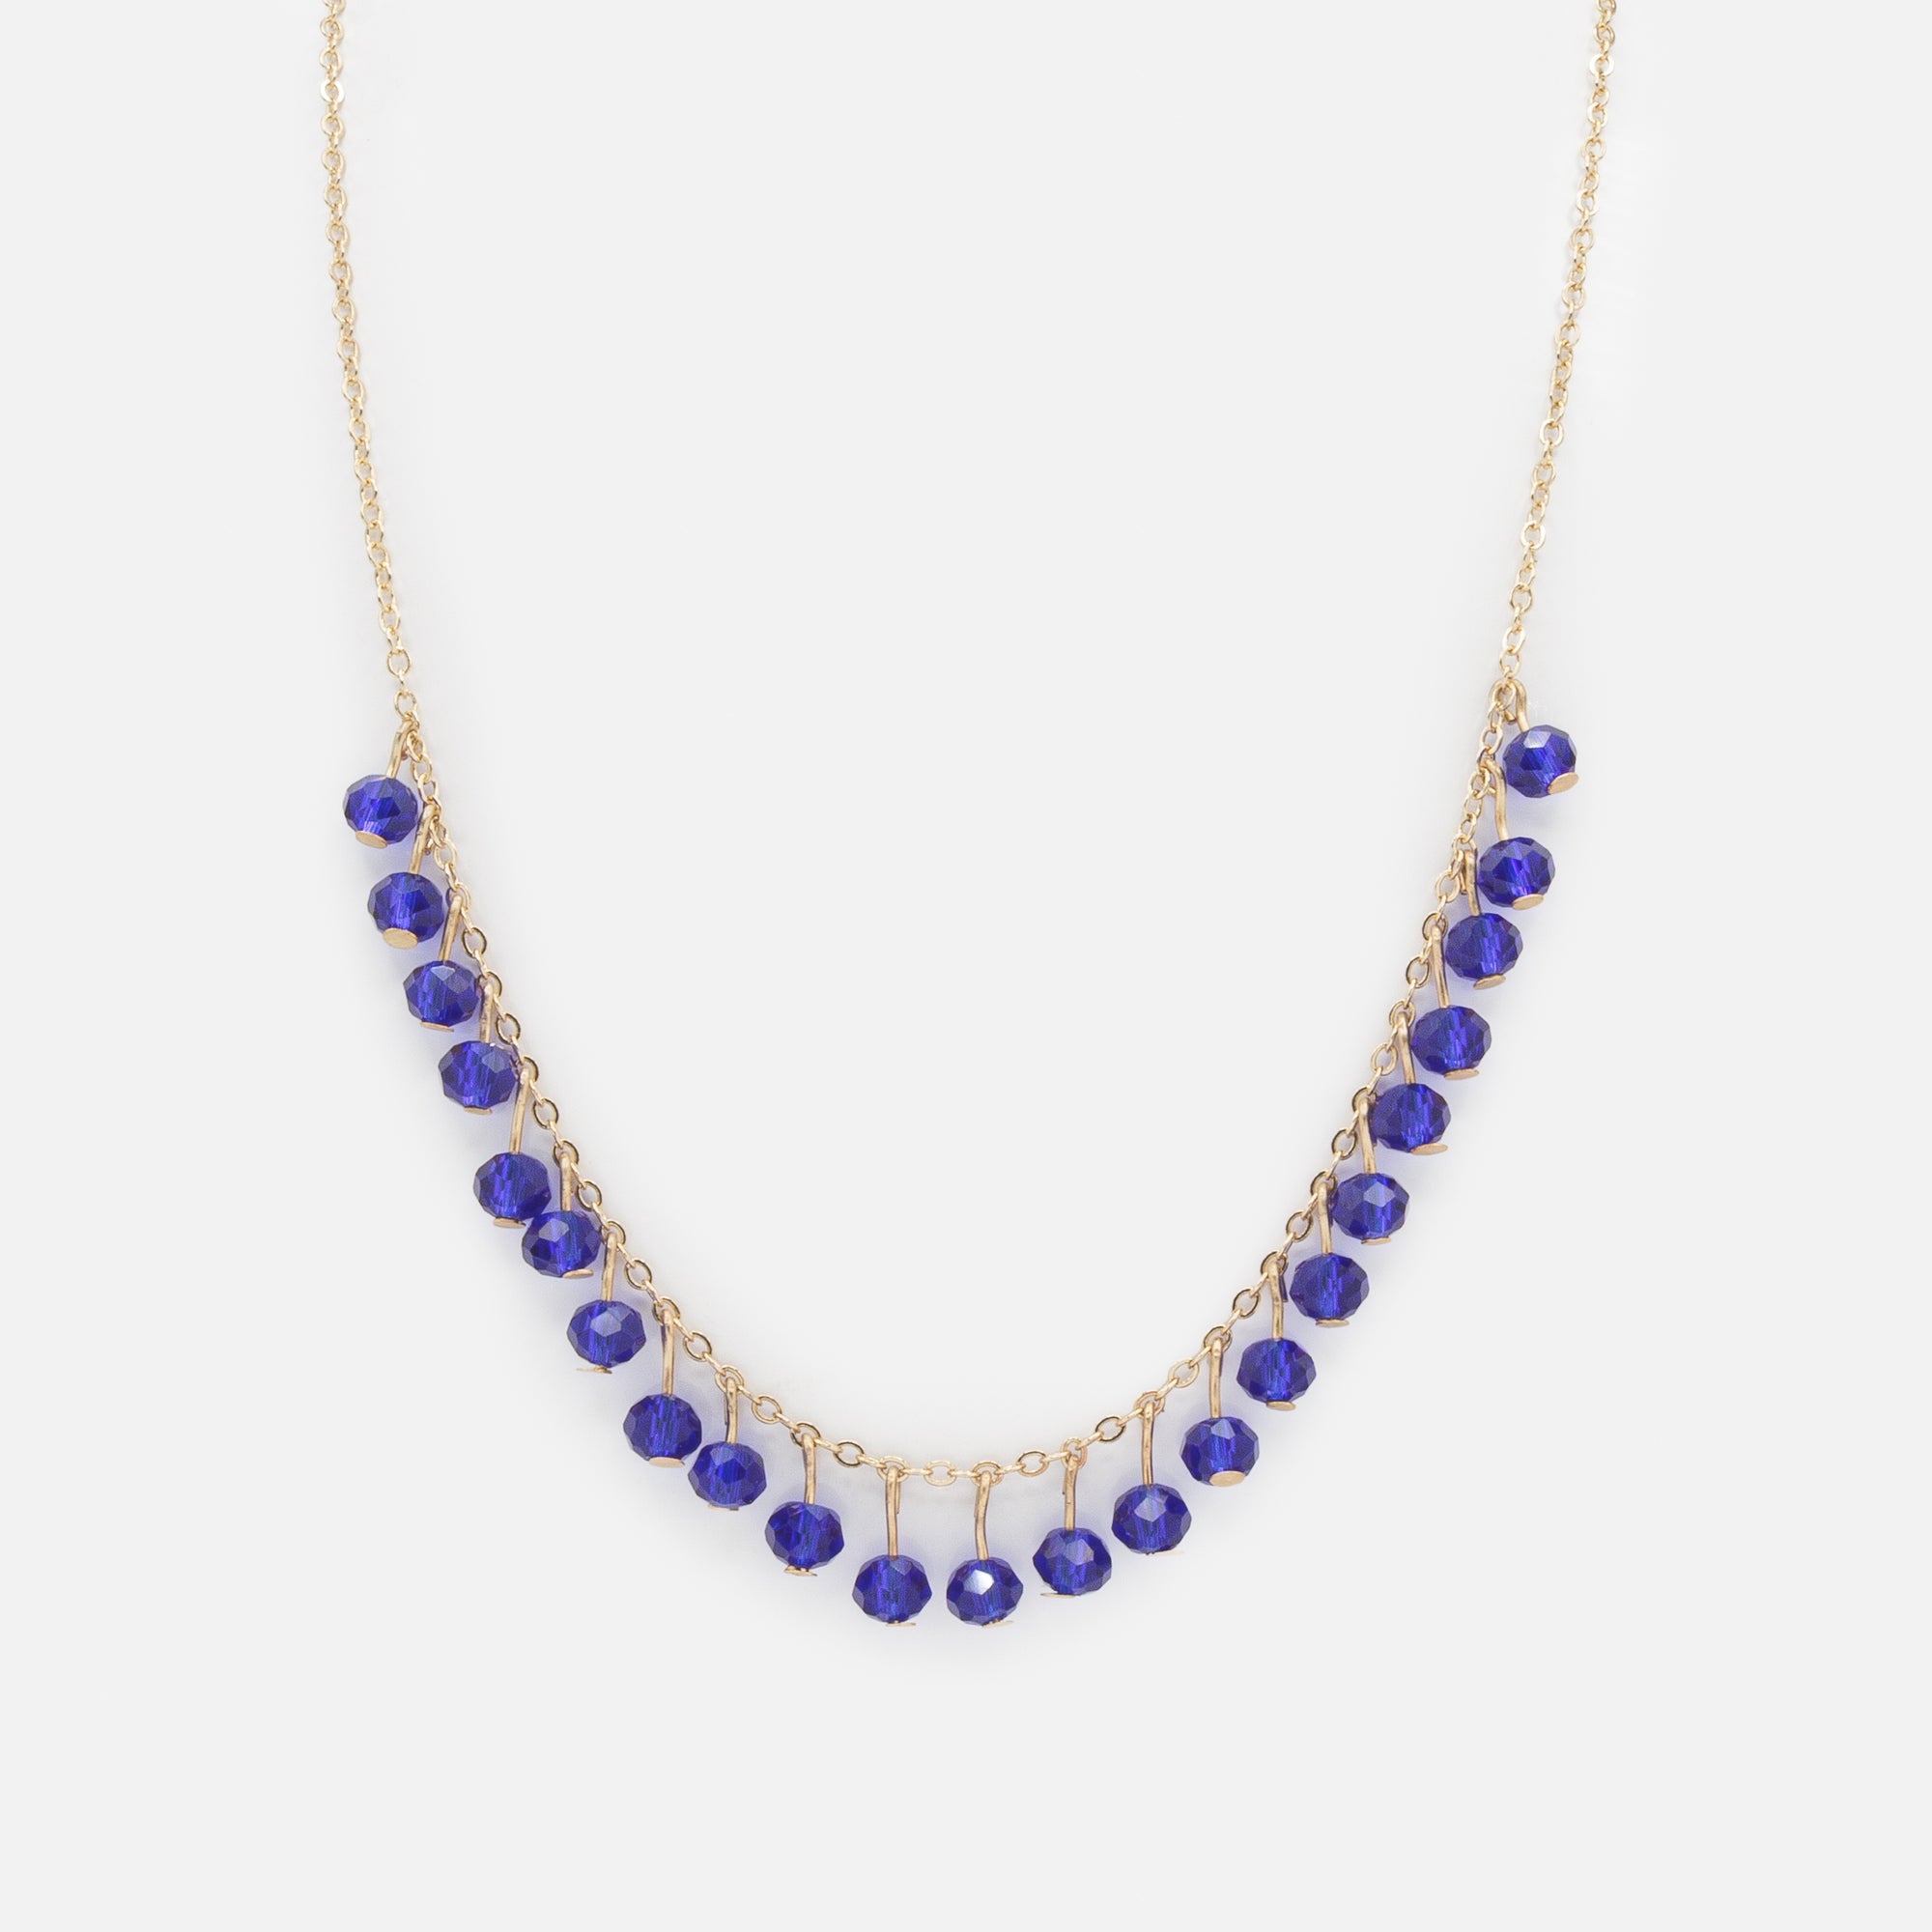 Royal blue ball necklace and gold triangle earrings set with mother-of-pearl and cubic zirconia